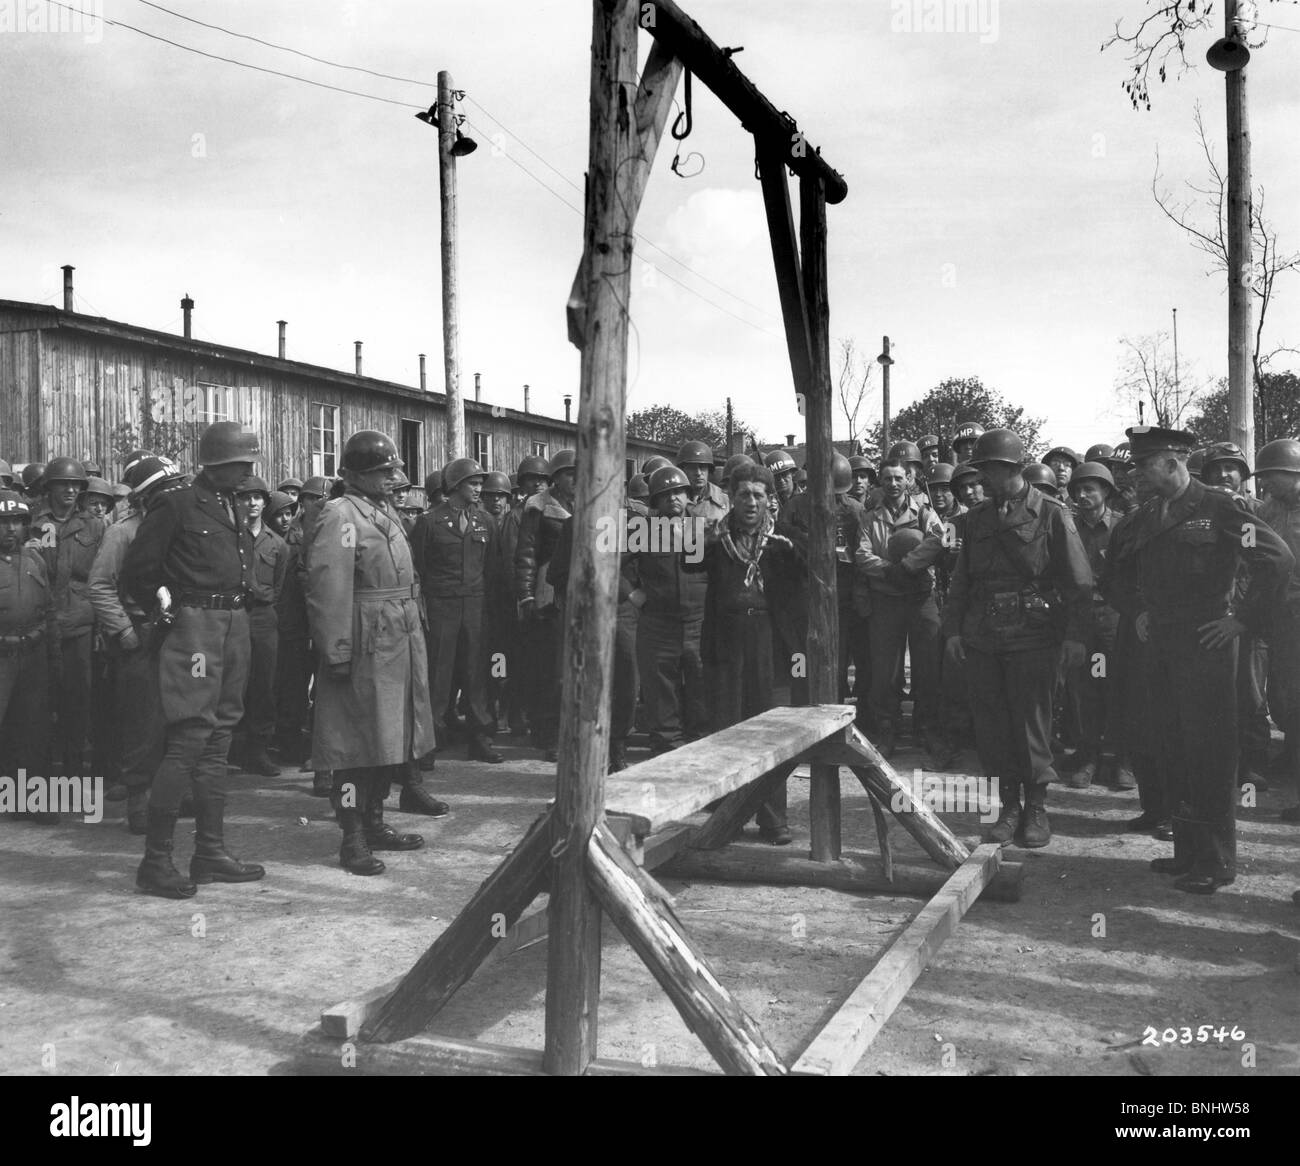 World War II Ohrdruf forced labor camp Buchenwald concentration camp Holocaust Germany April 1945 history historical historic Stock Photo